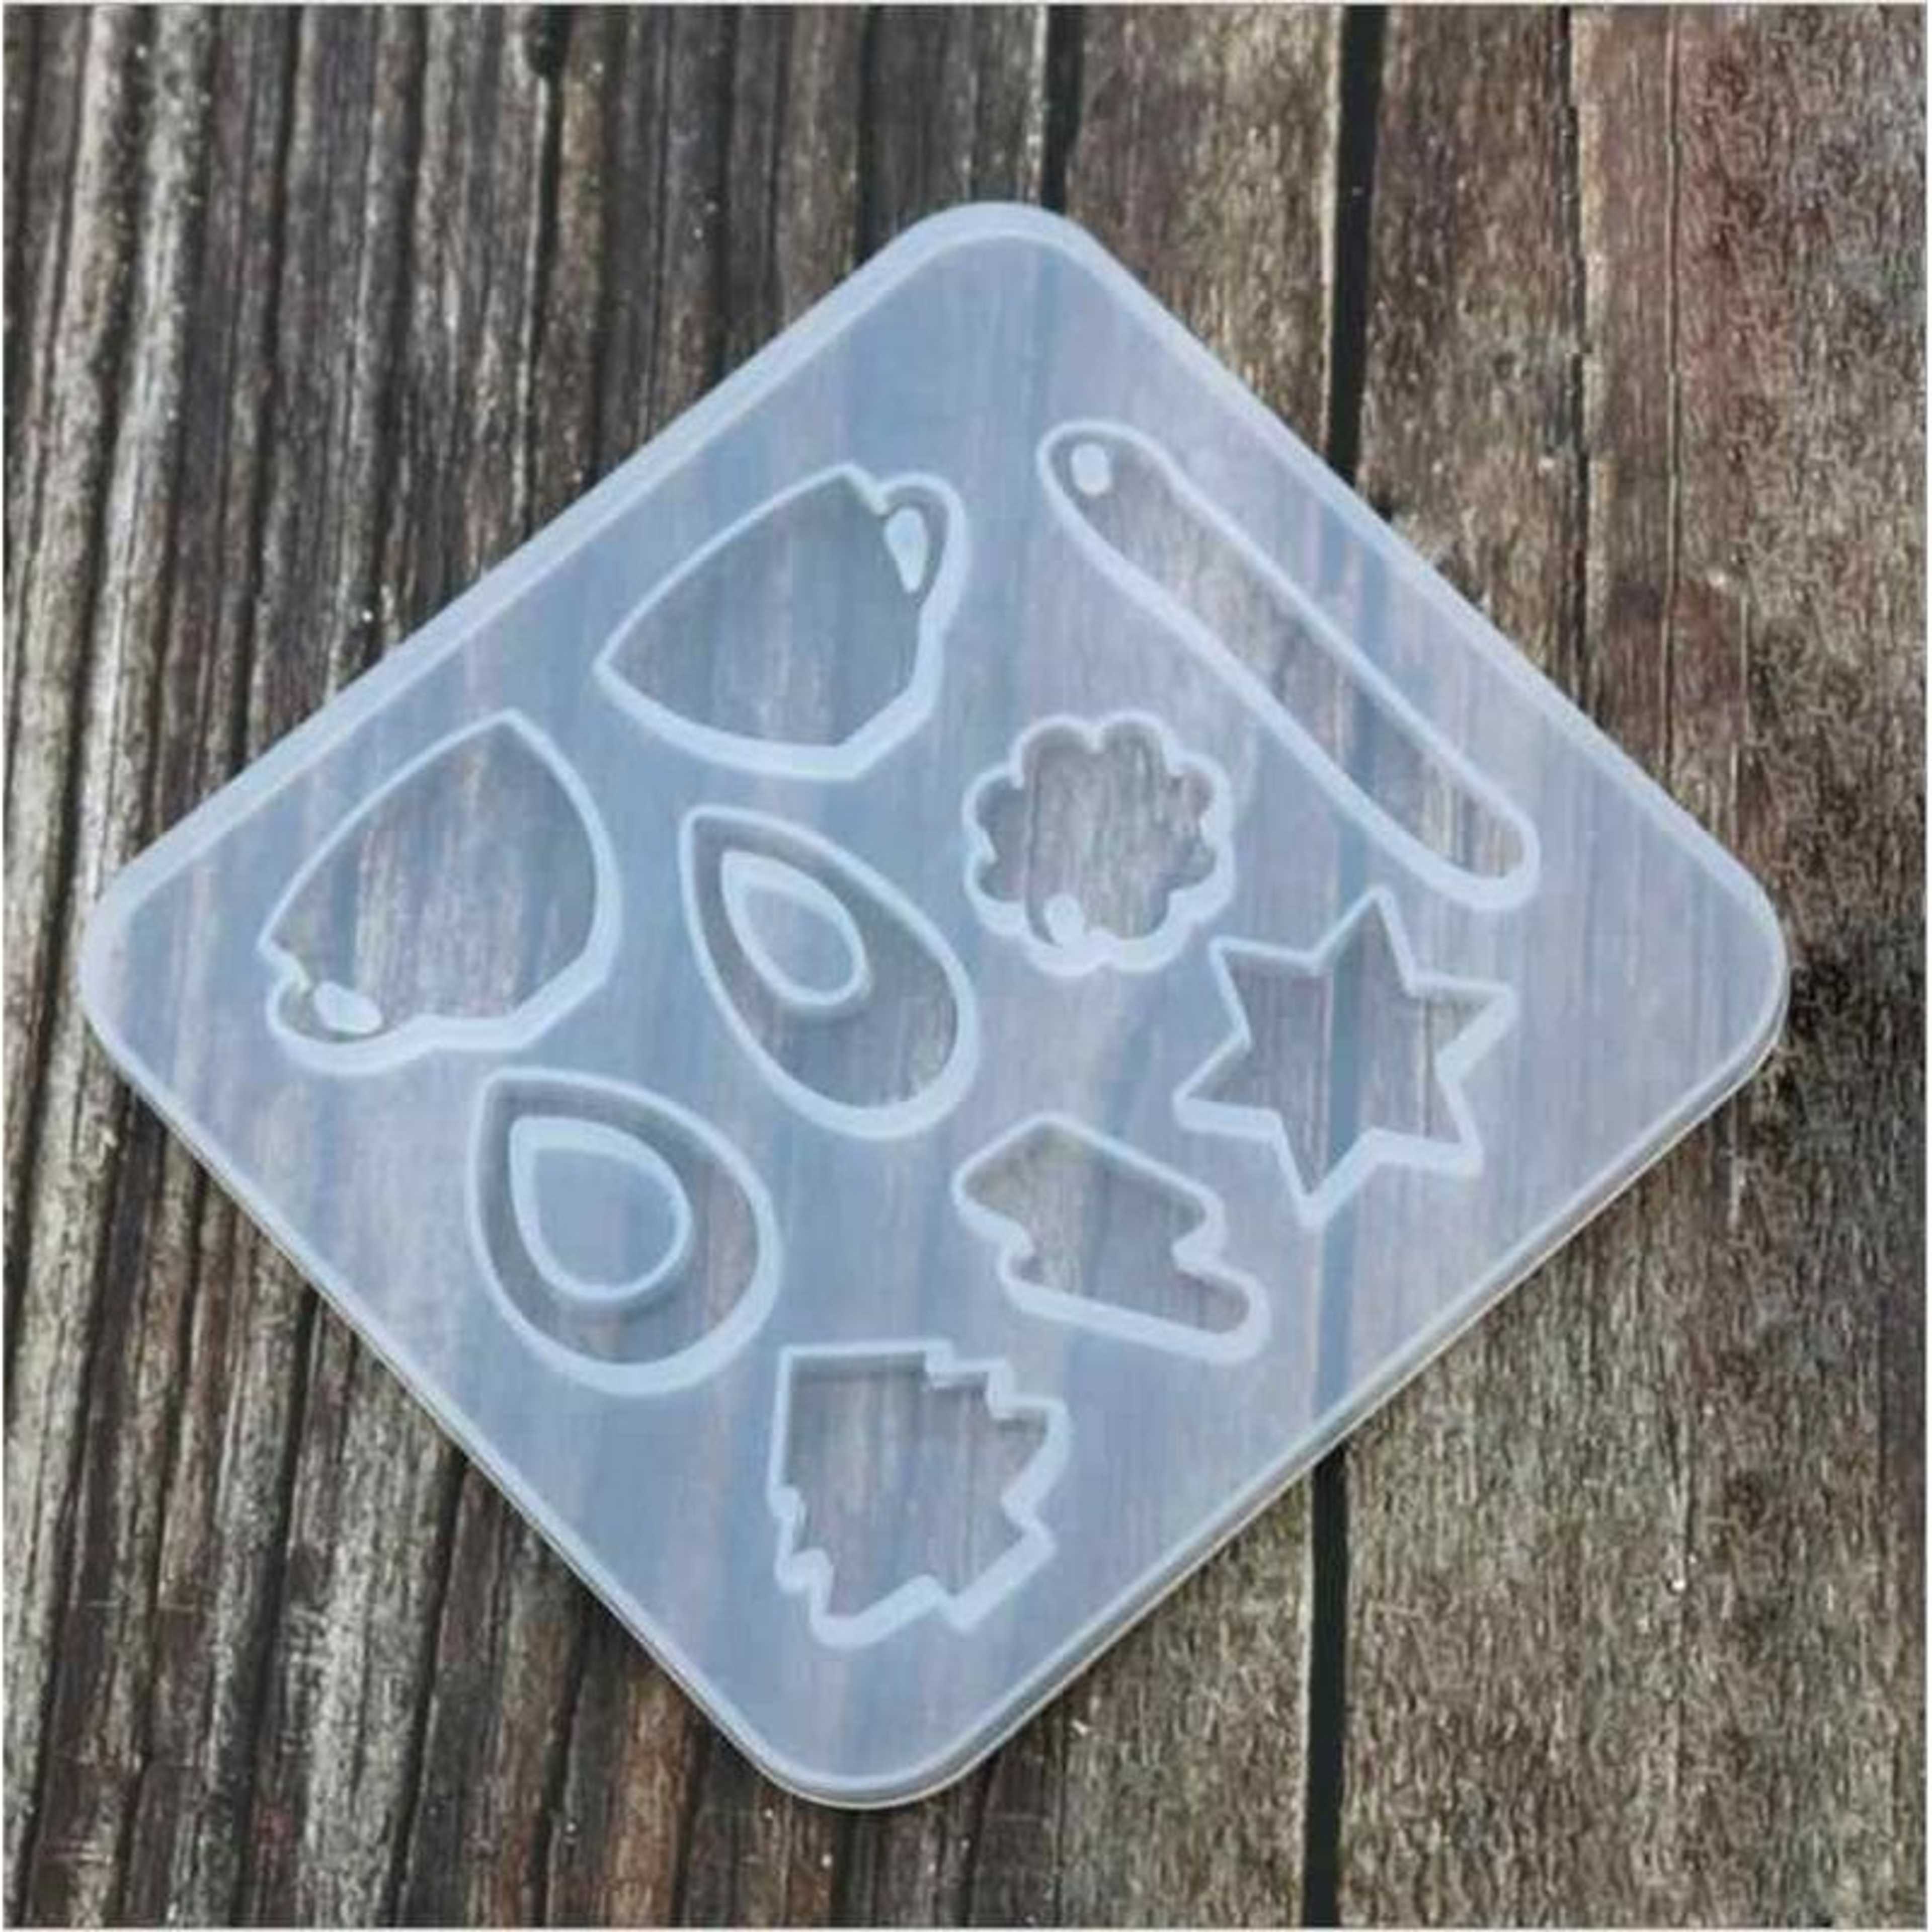 1 Pack 9 Case Different Shapes Silicone Jewelry Mold Epoxy Resin Mold, Earrings Making Mold, Resin Moulds Jewelry Resin Molds